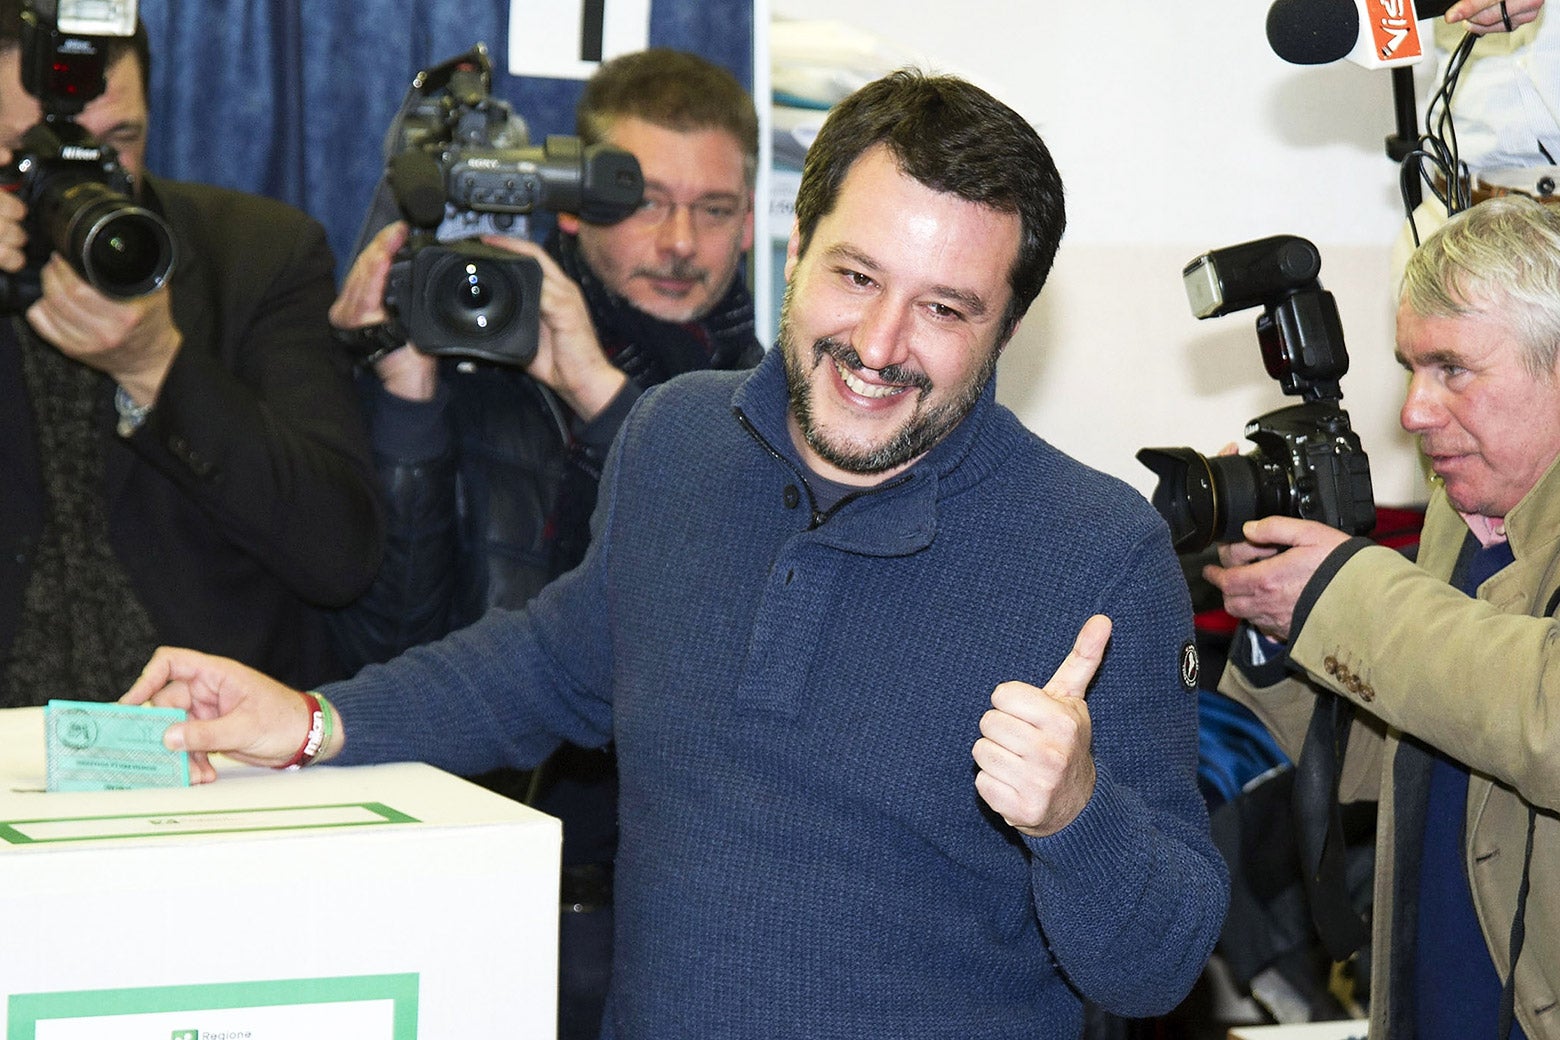 Leader of Lega Nord party Matteo Salvini votes in the Italian General Election at a polling station on March 4, 2018 in Milan, Italy. The economy and immigration are key factors in the 2018 Italian General Election after parliament was dissolved in December 2017. 